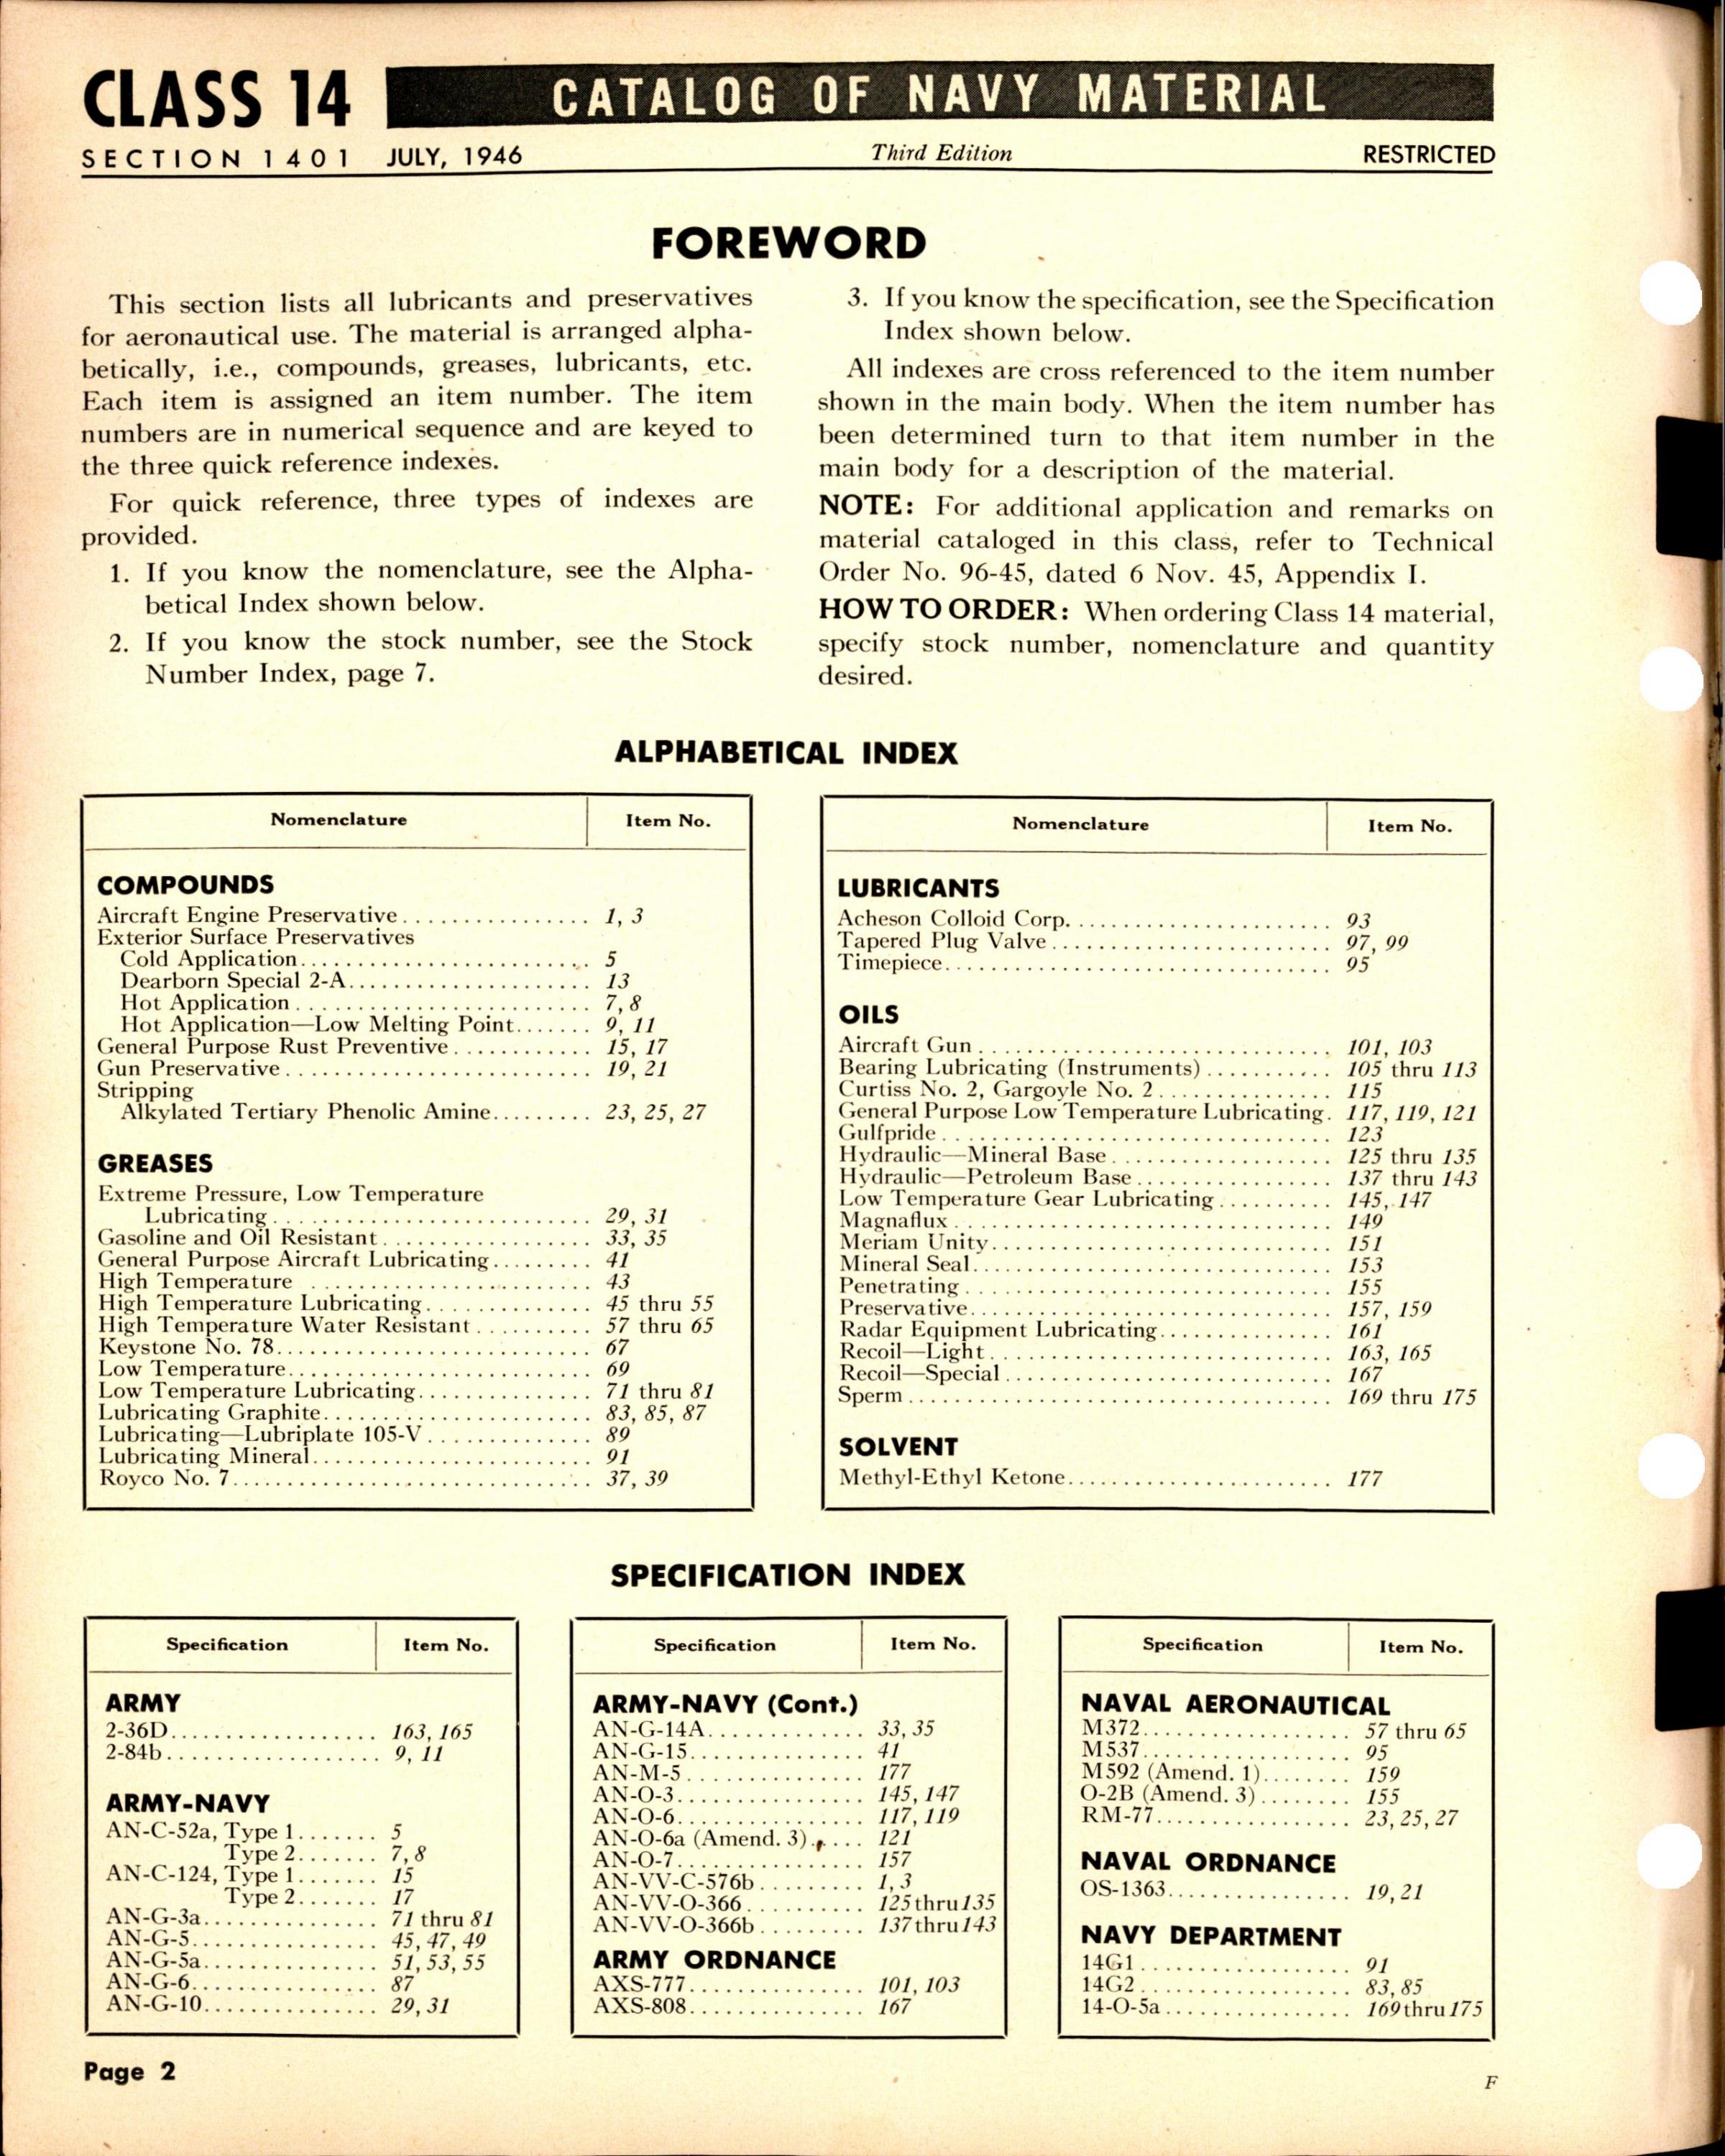 Sample page 2 from AirCorps Library document: Compounds, Greases, Lubricants, Oils, & Solvents